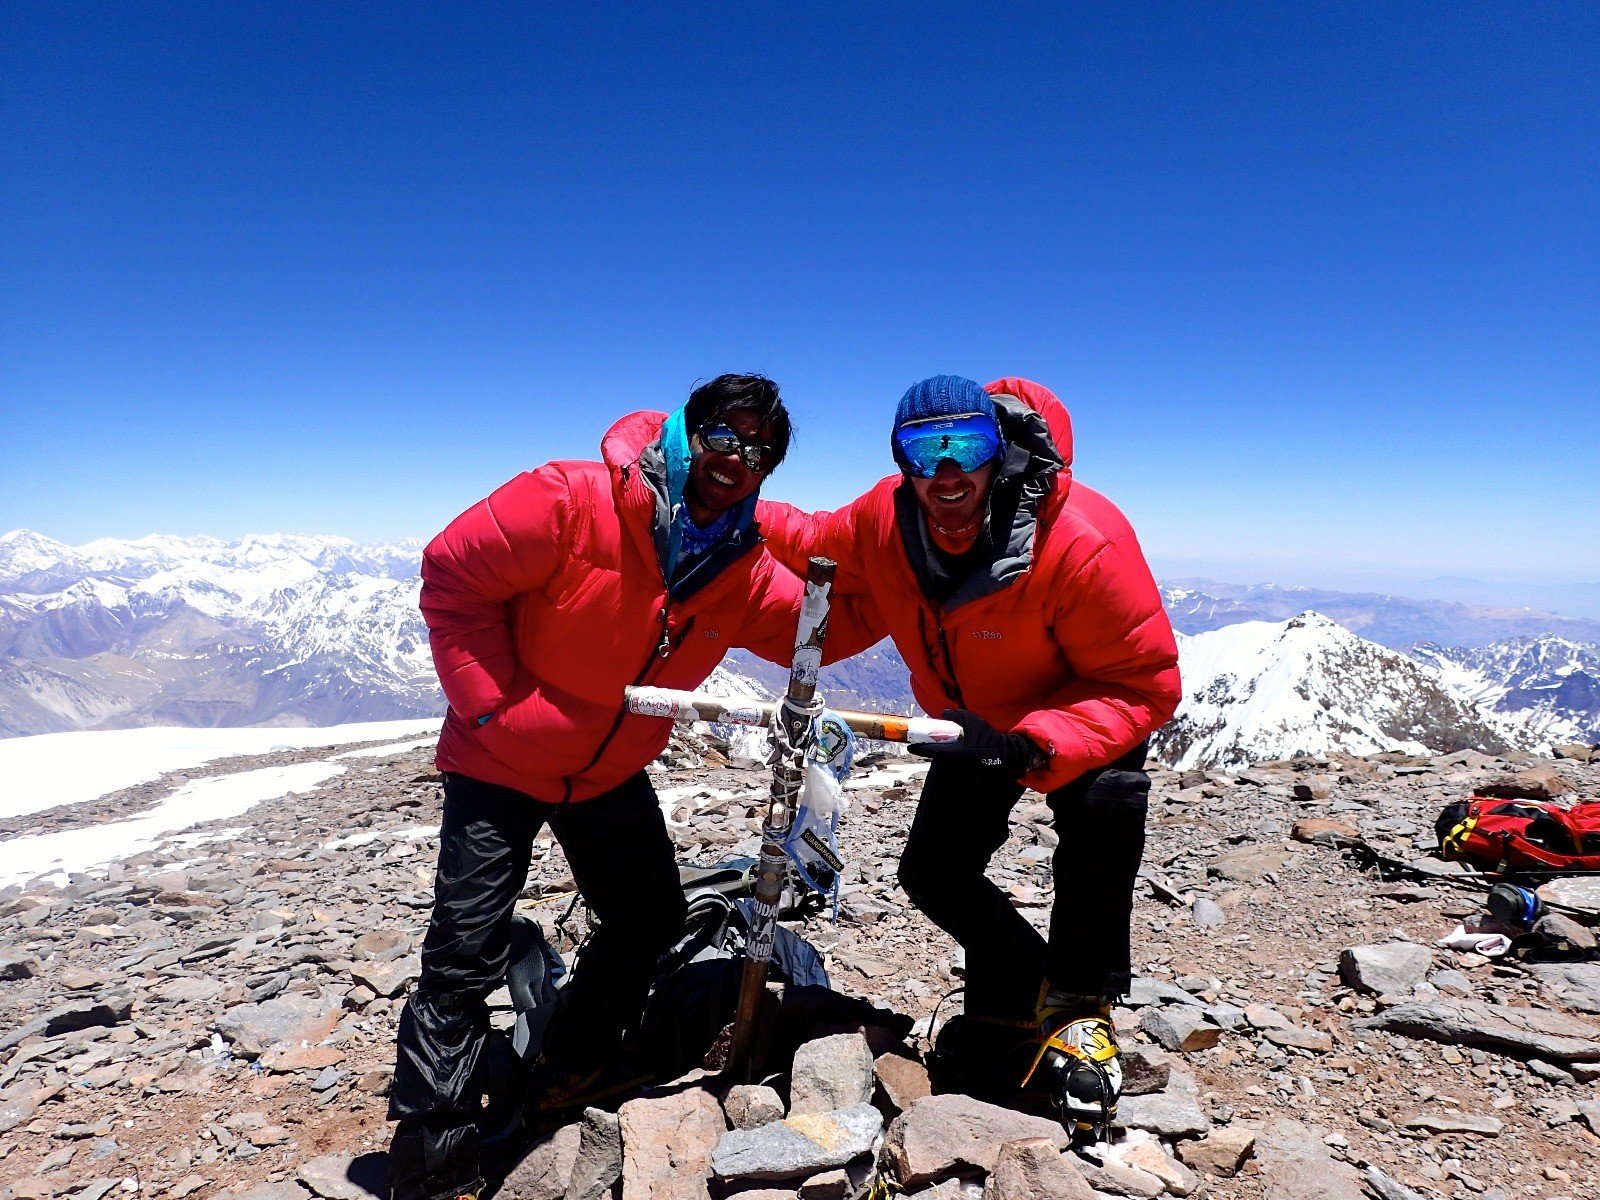 Lawrence Wong [left] and his climbing buddy Christopher Twiss on the summit of Aconcagua. Photo: Handout